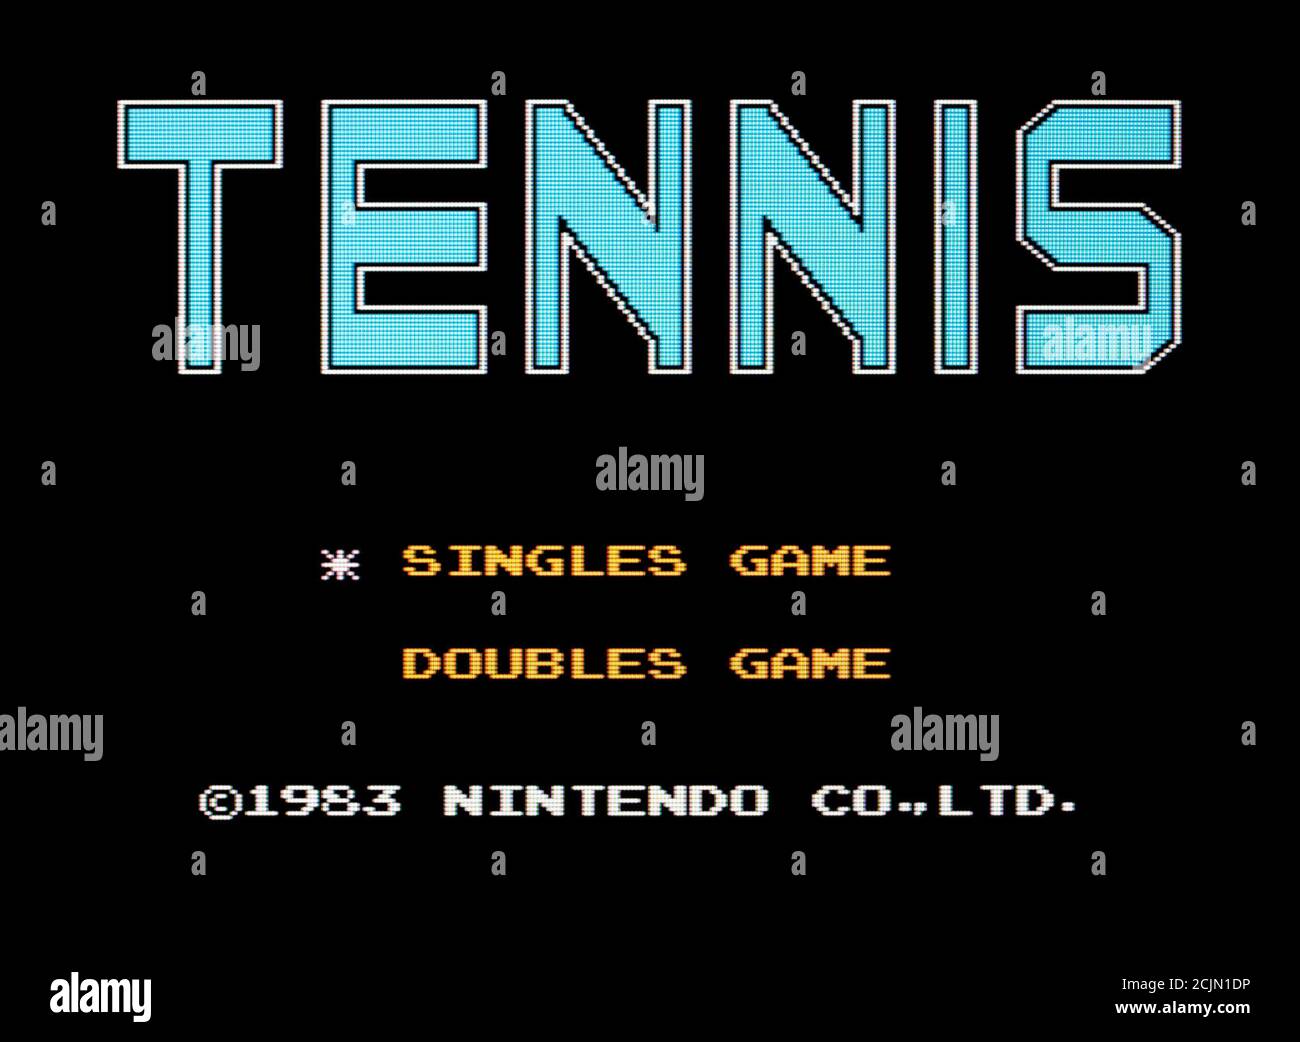 Tennis - Nintendo Entertainment System - NES Videogame - Editorial use only Stock Photo